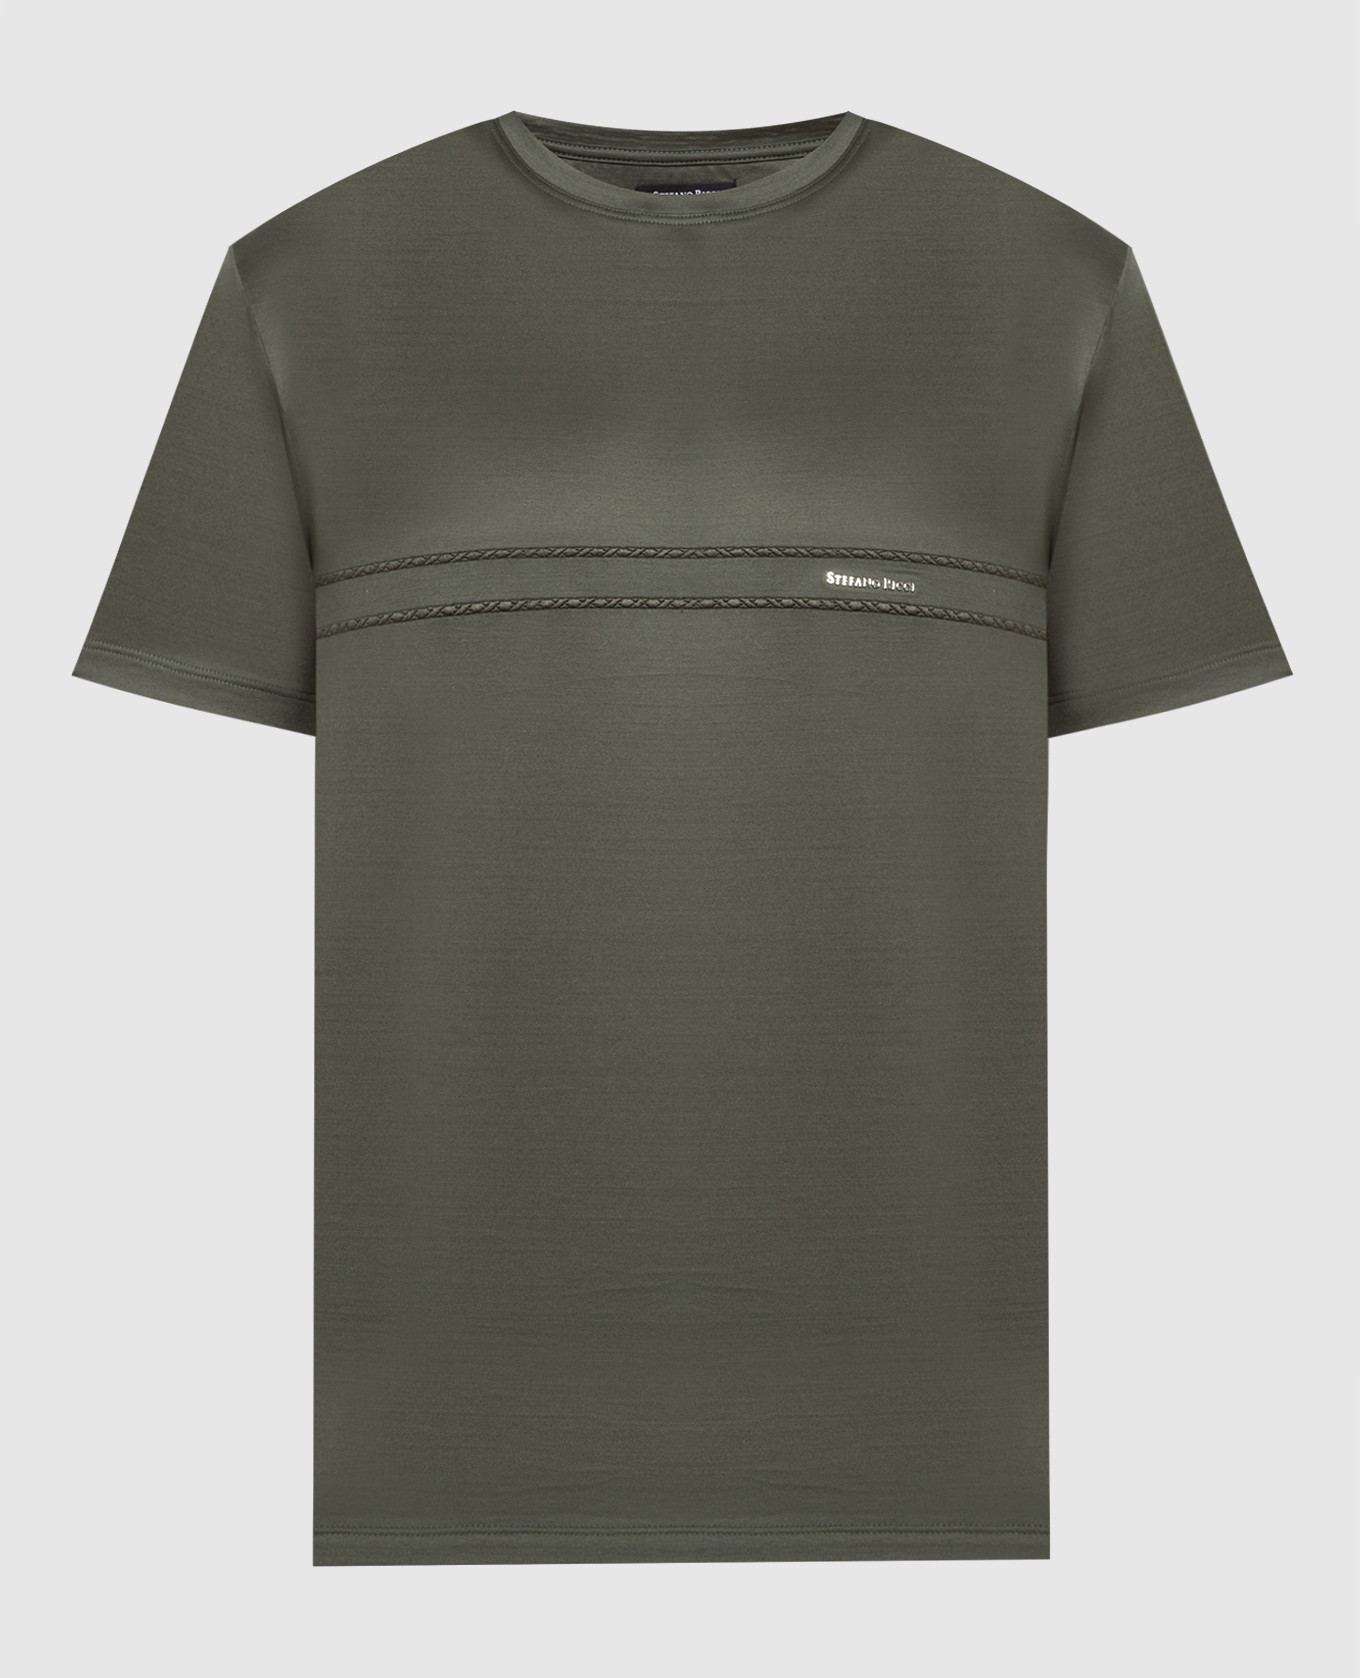 Green t-shirt with logo